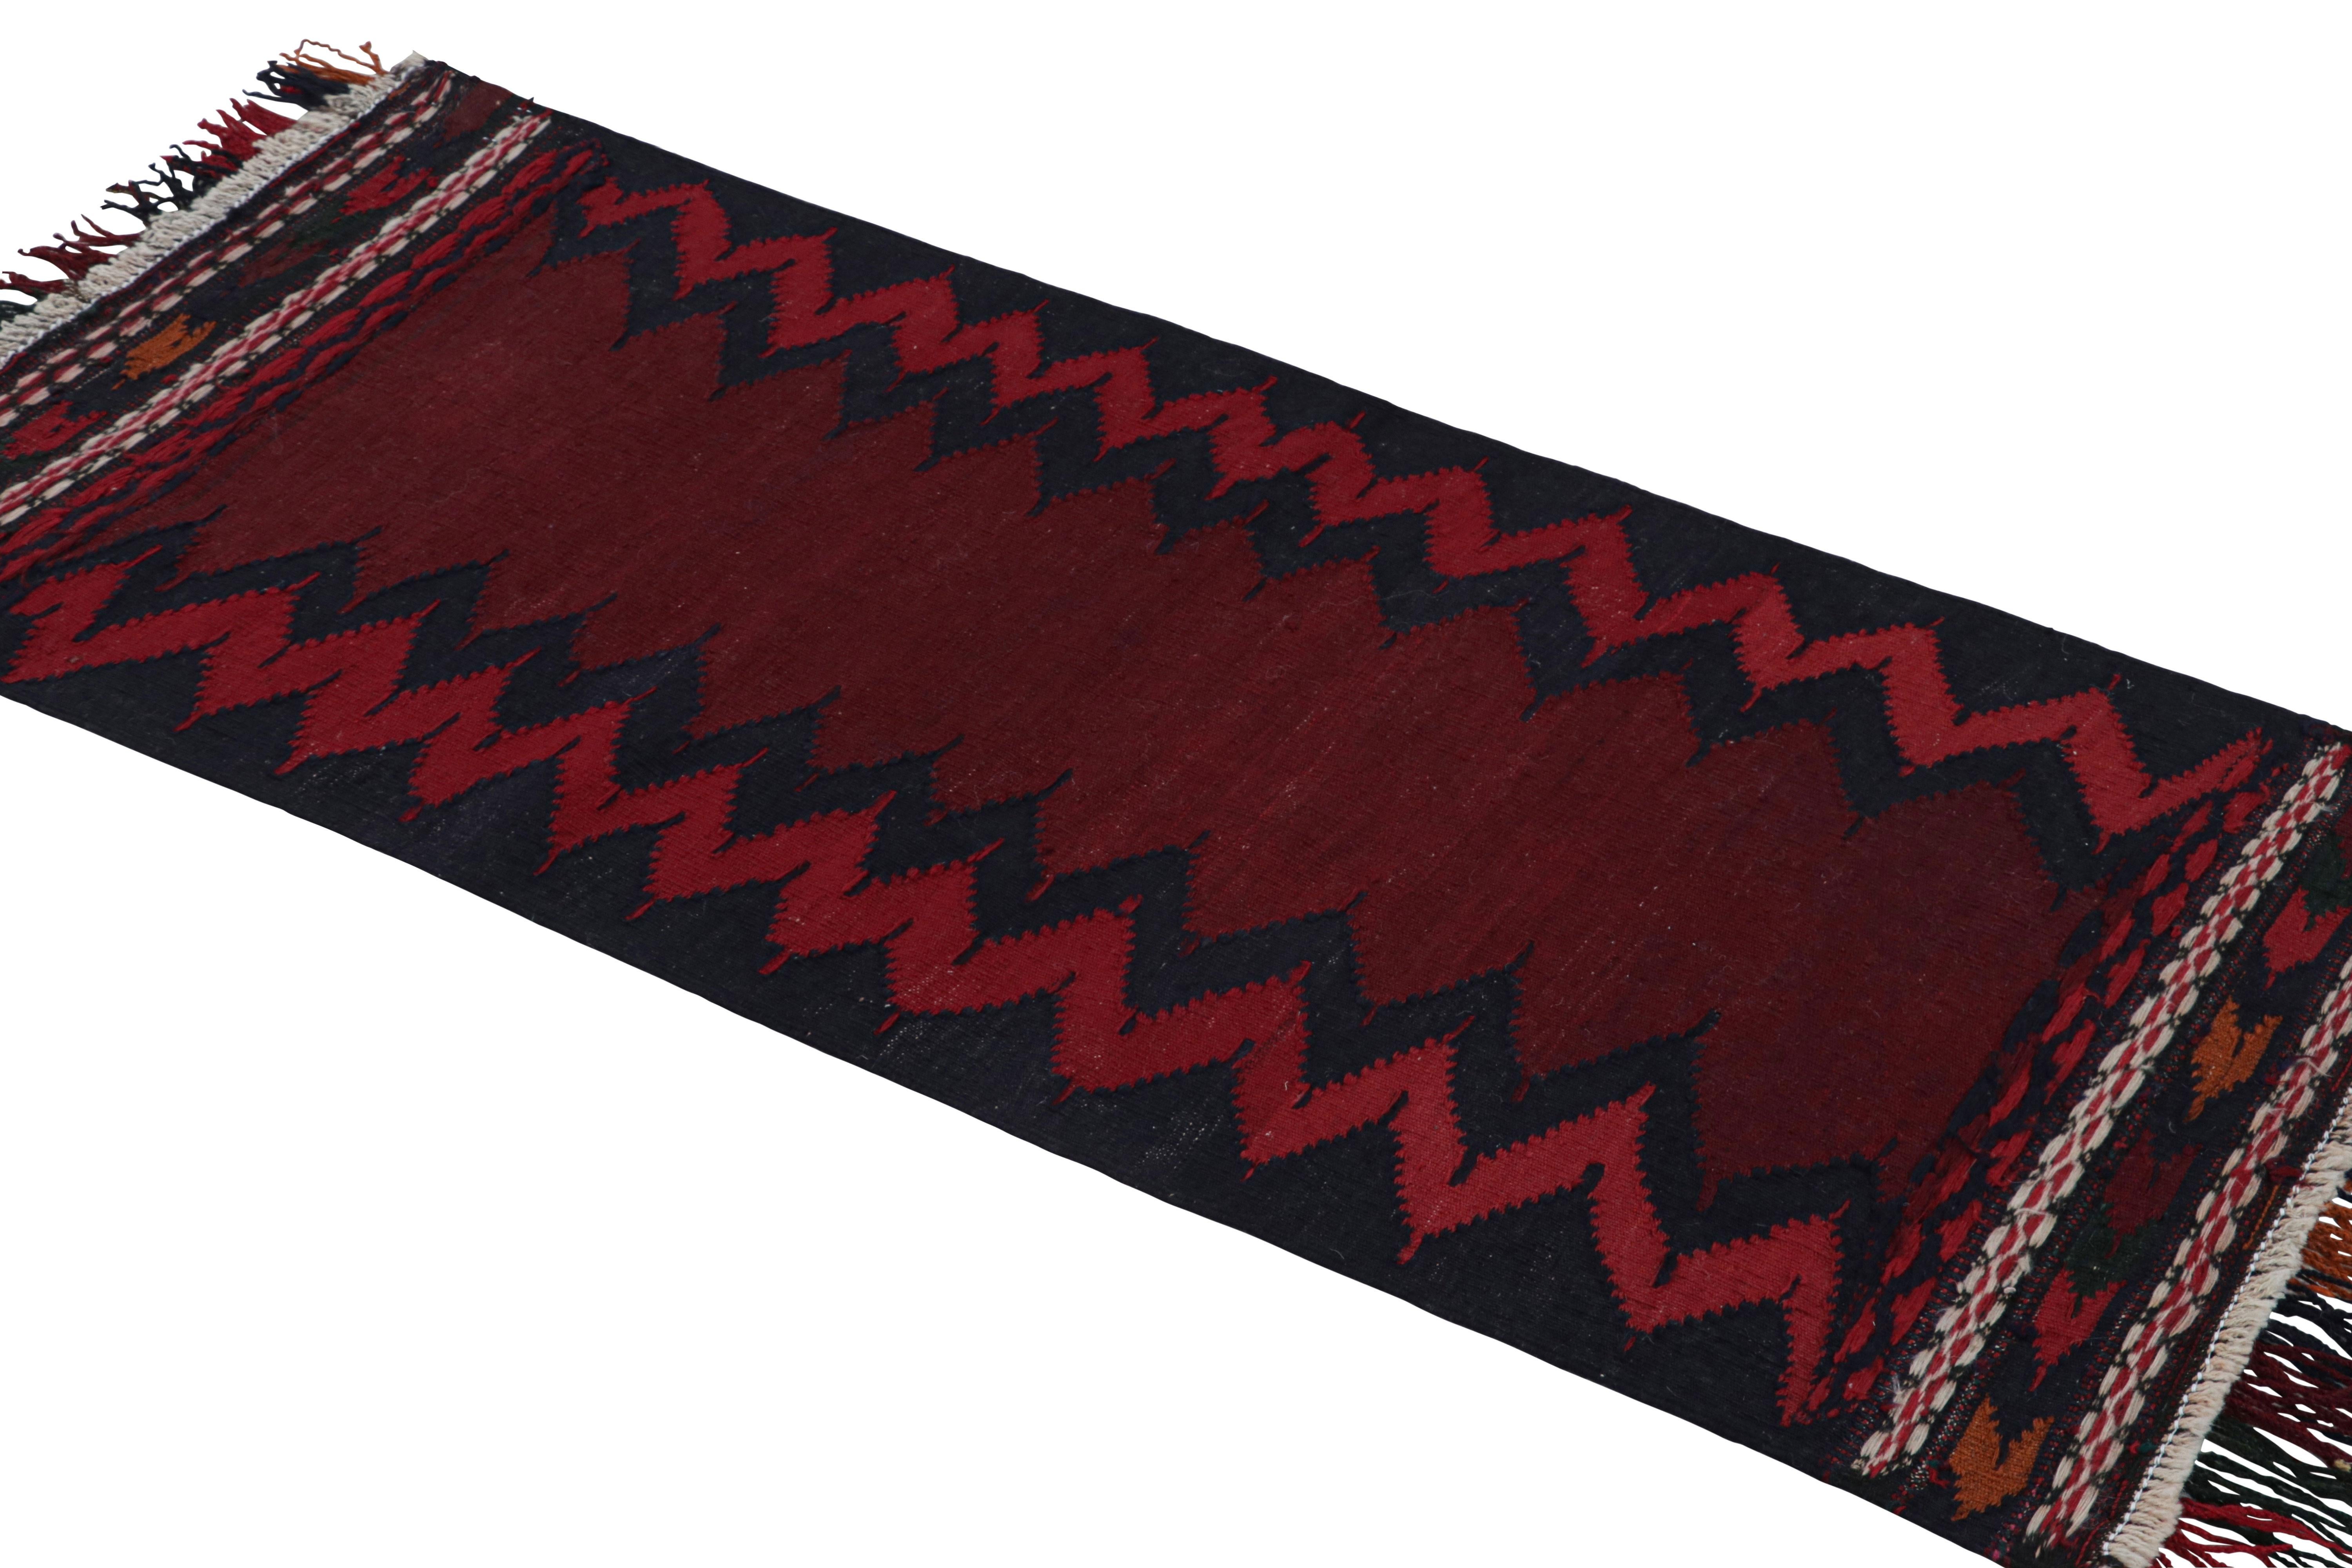 Hand-Woven Vintage Afghan Kilim Runner in Burgundy with Chevrons, from Rug & Kilim For Sale